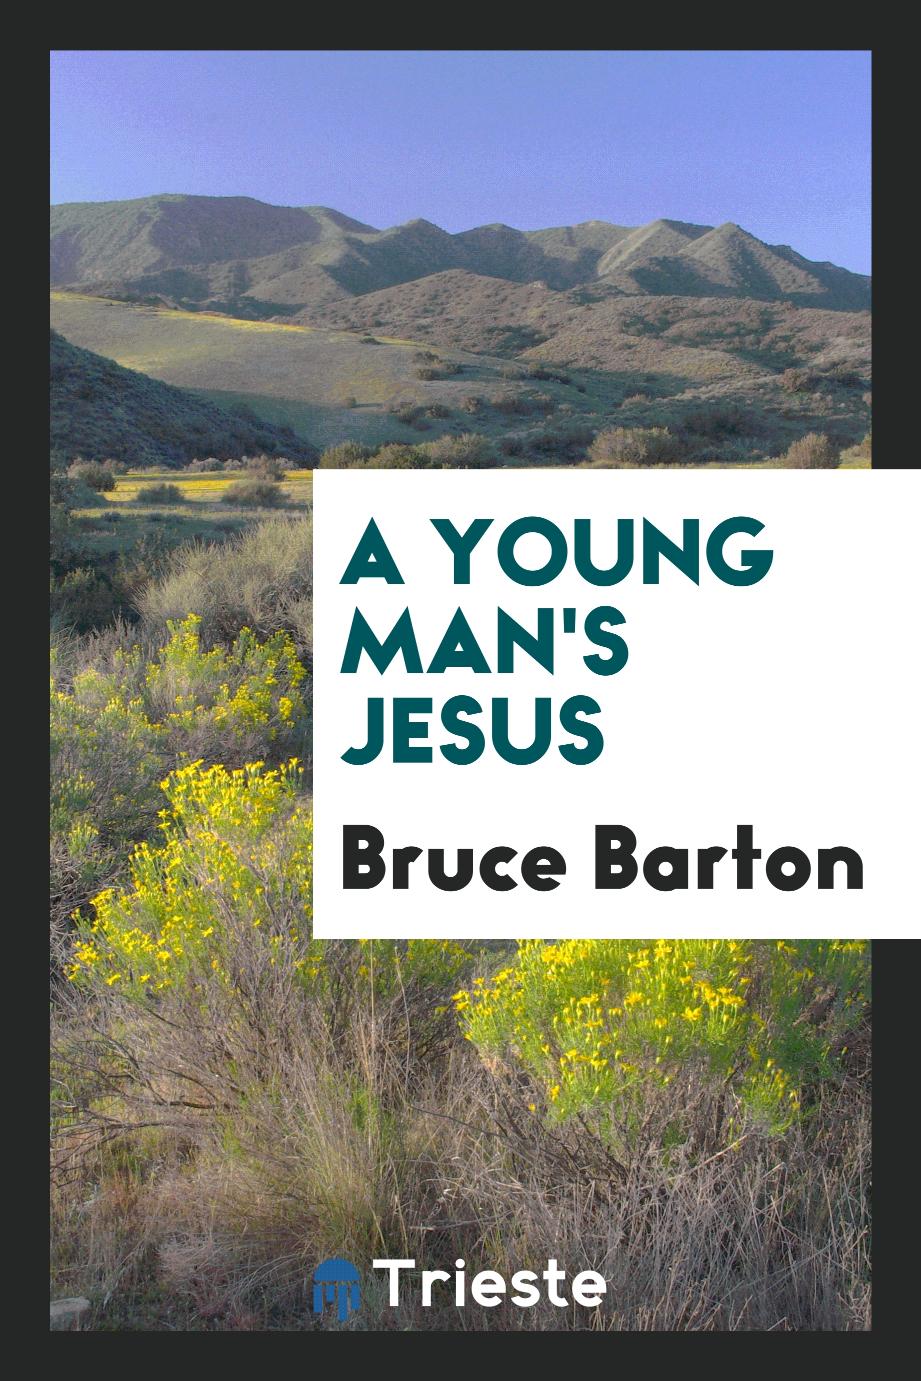 A young man's Jesus